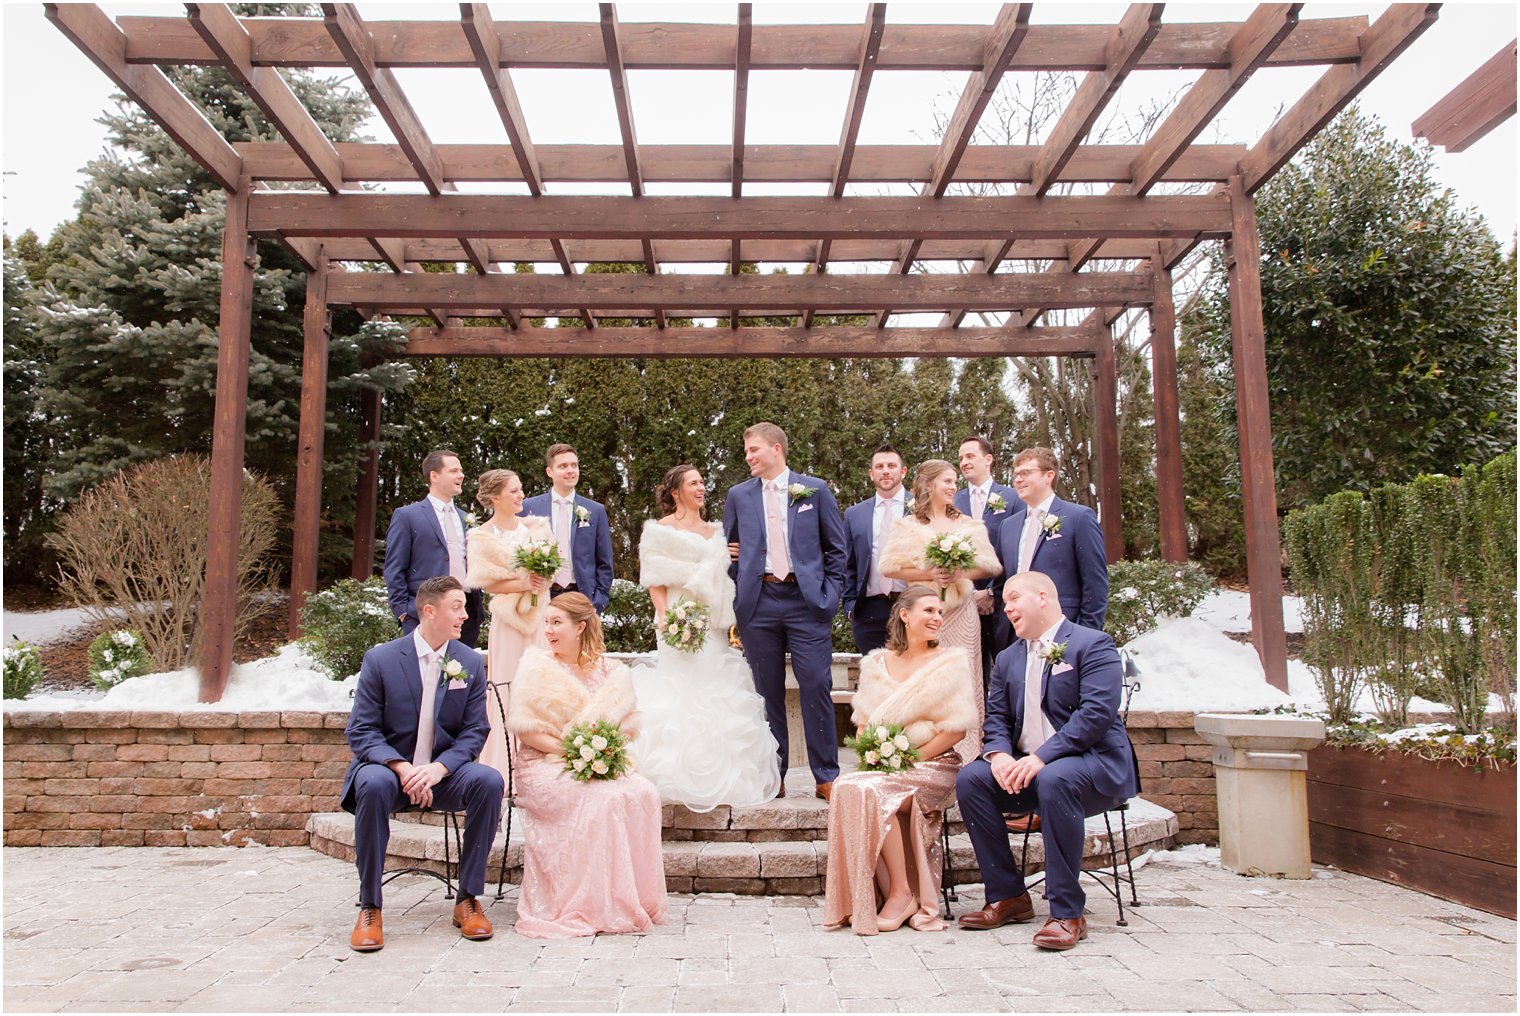 Formal portrait of bridal party wearing rose gold and navy | Stone House at Stirling Ridge in Warren, NJ